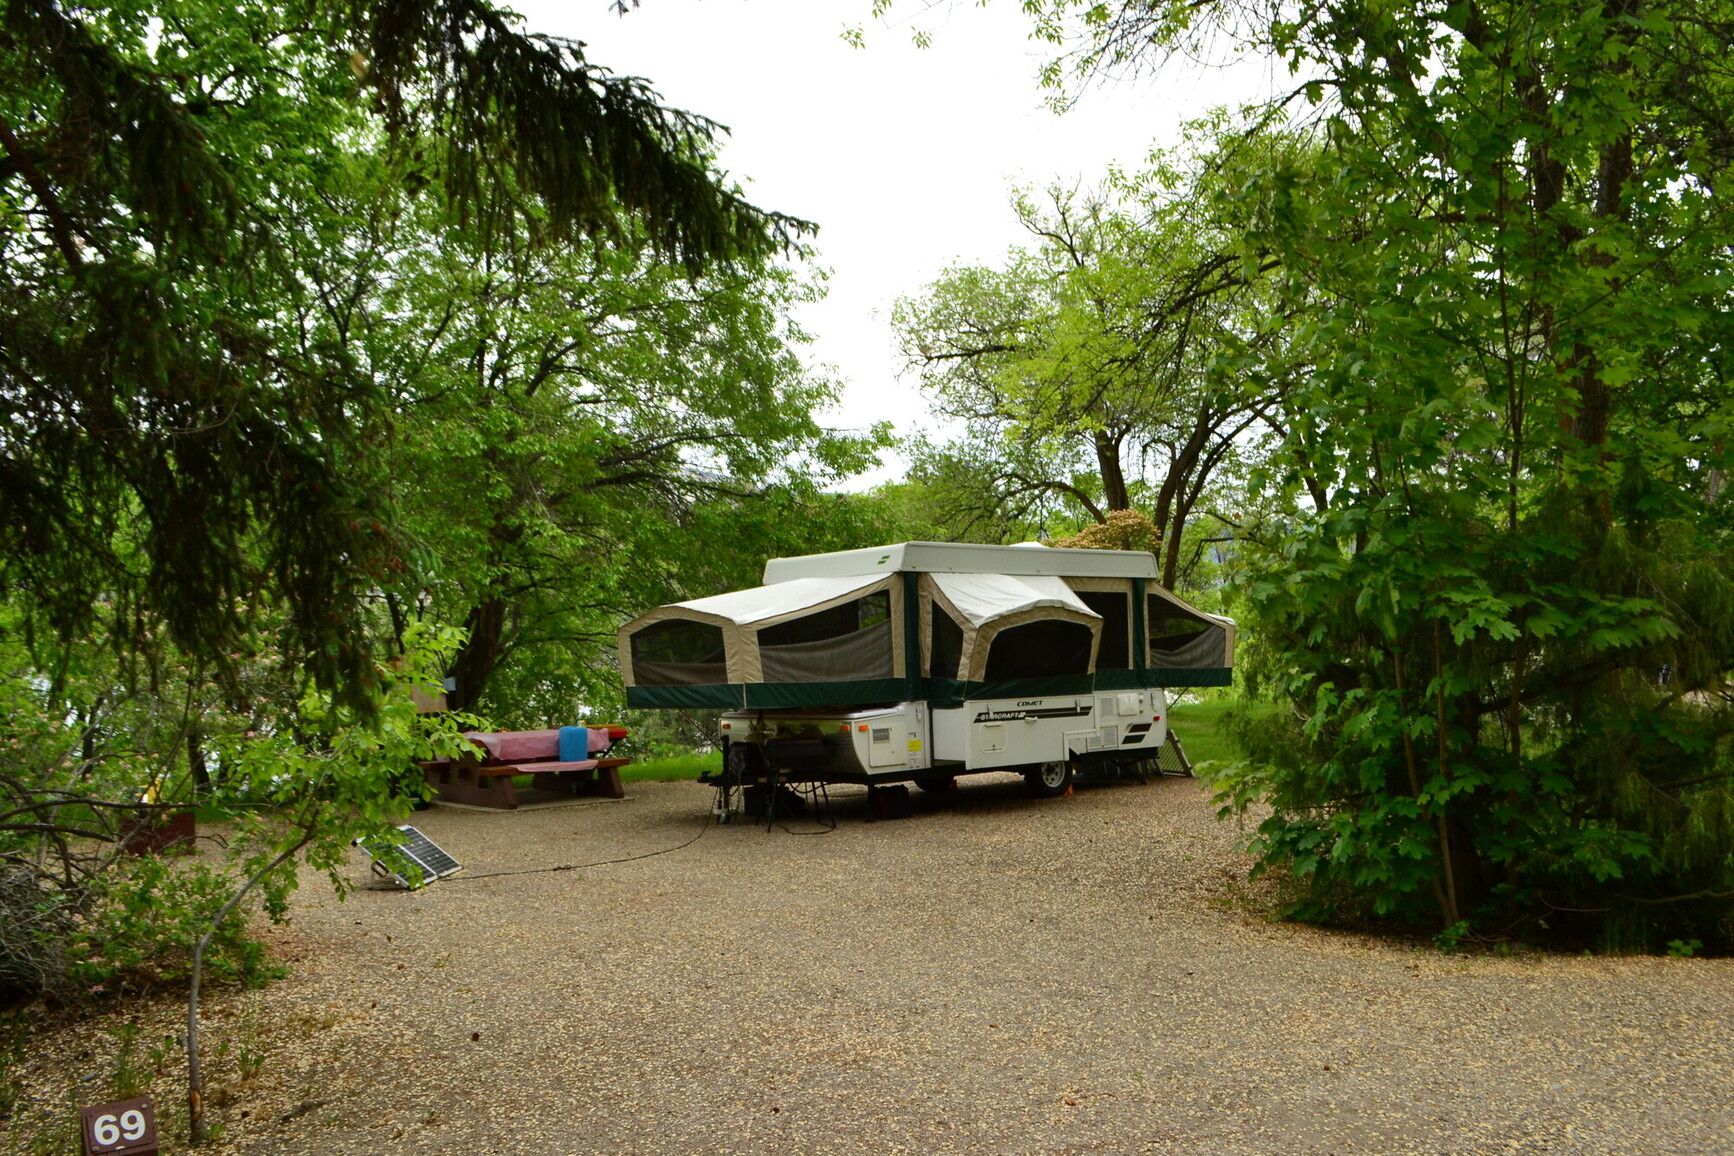 A spacious campsite in Okanagan Lake Park, perfect for tents, campers, or RVs.